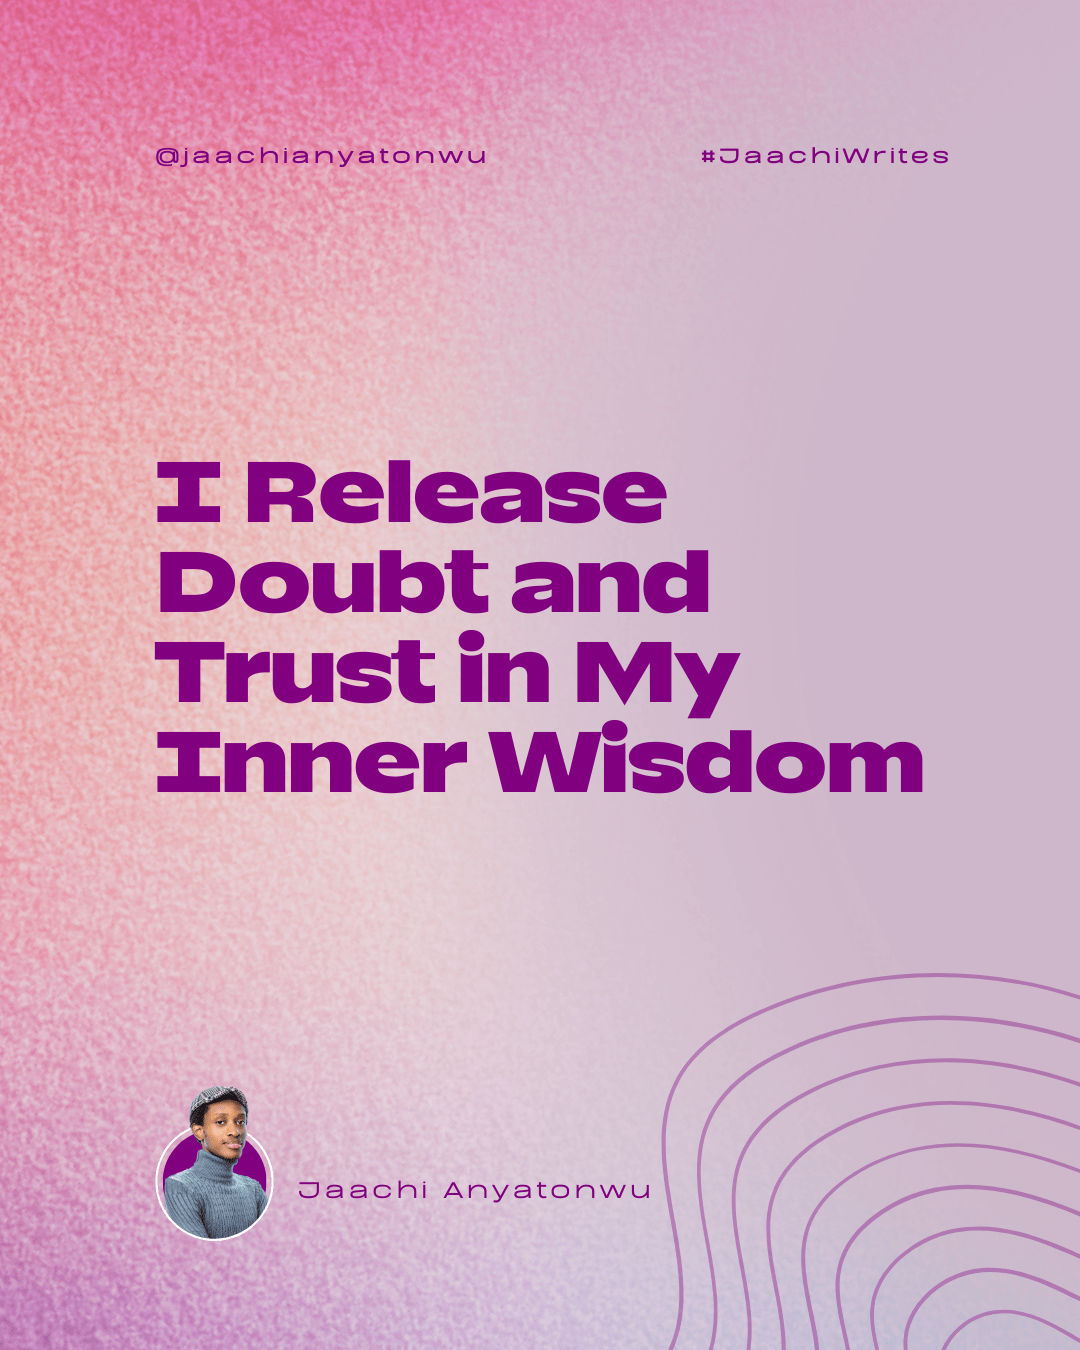 Today, I Release Doubt and Trust in My Inner Wisdom